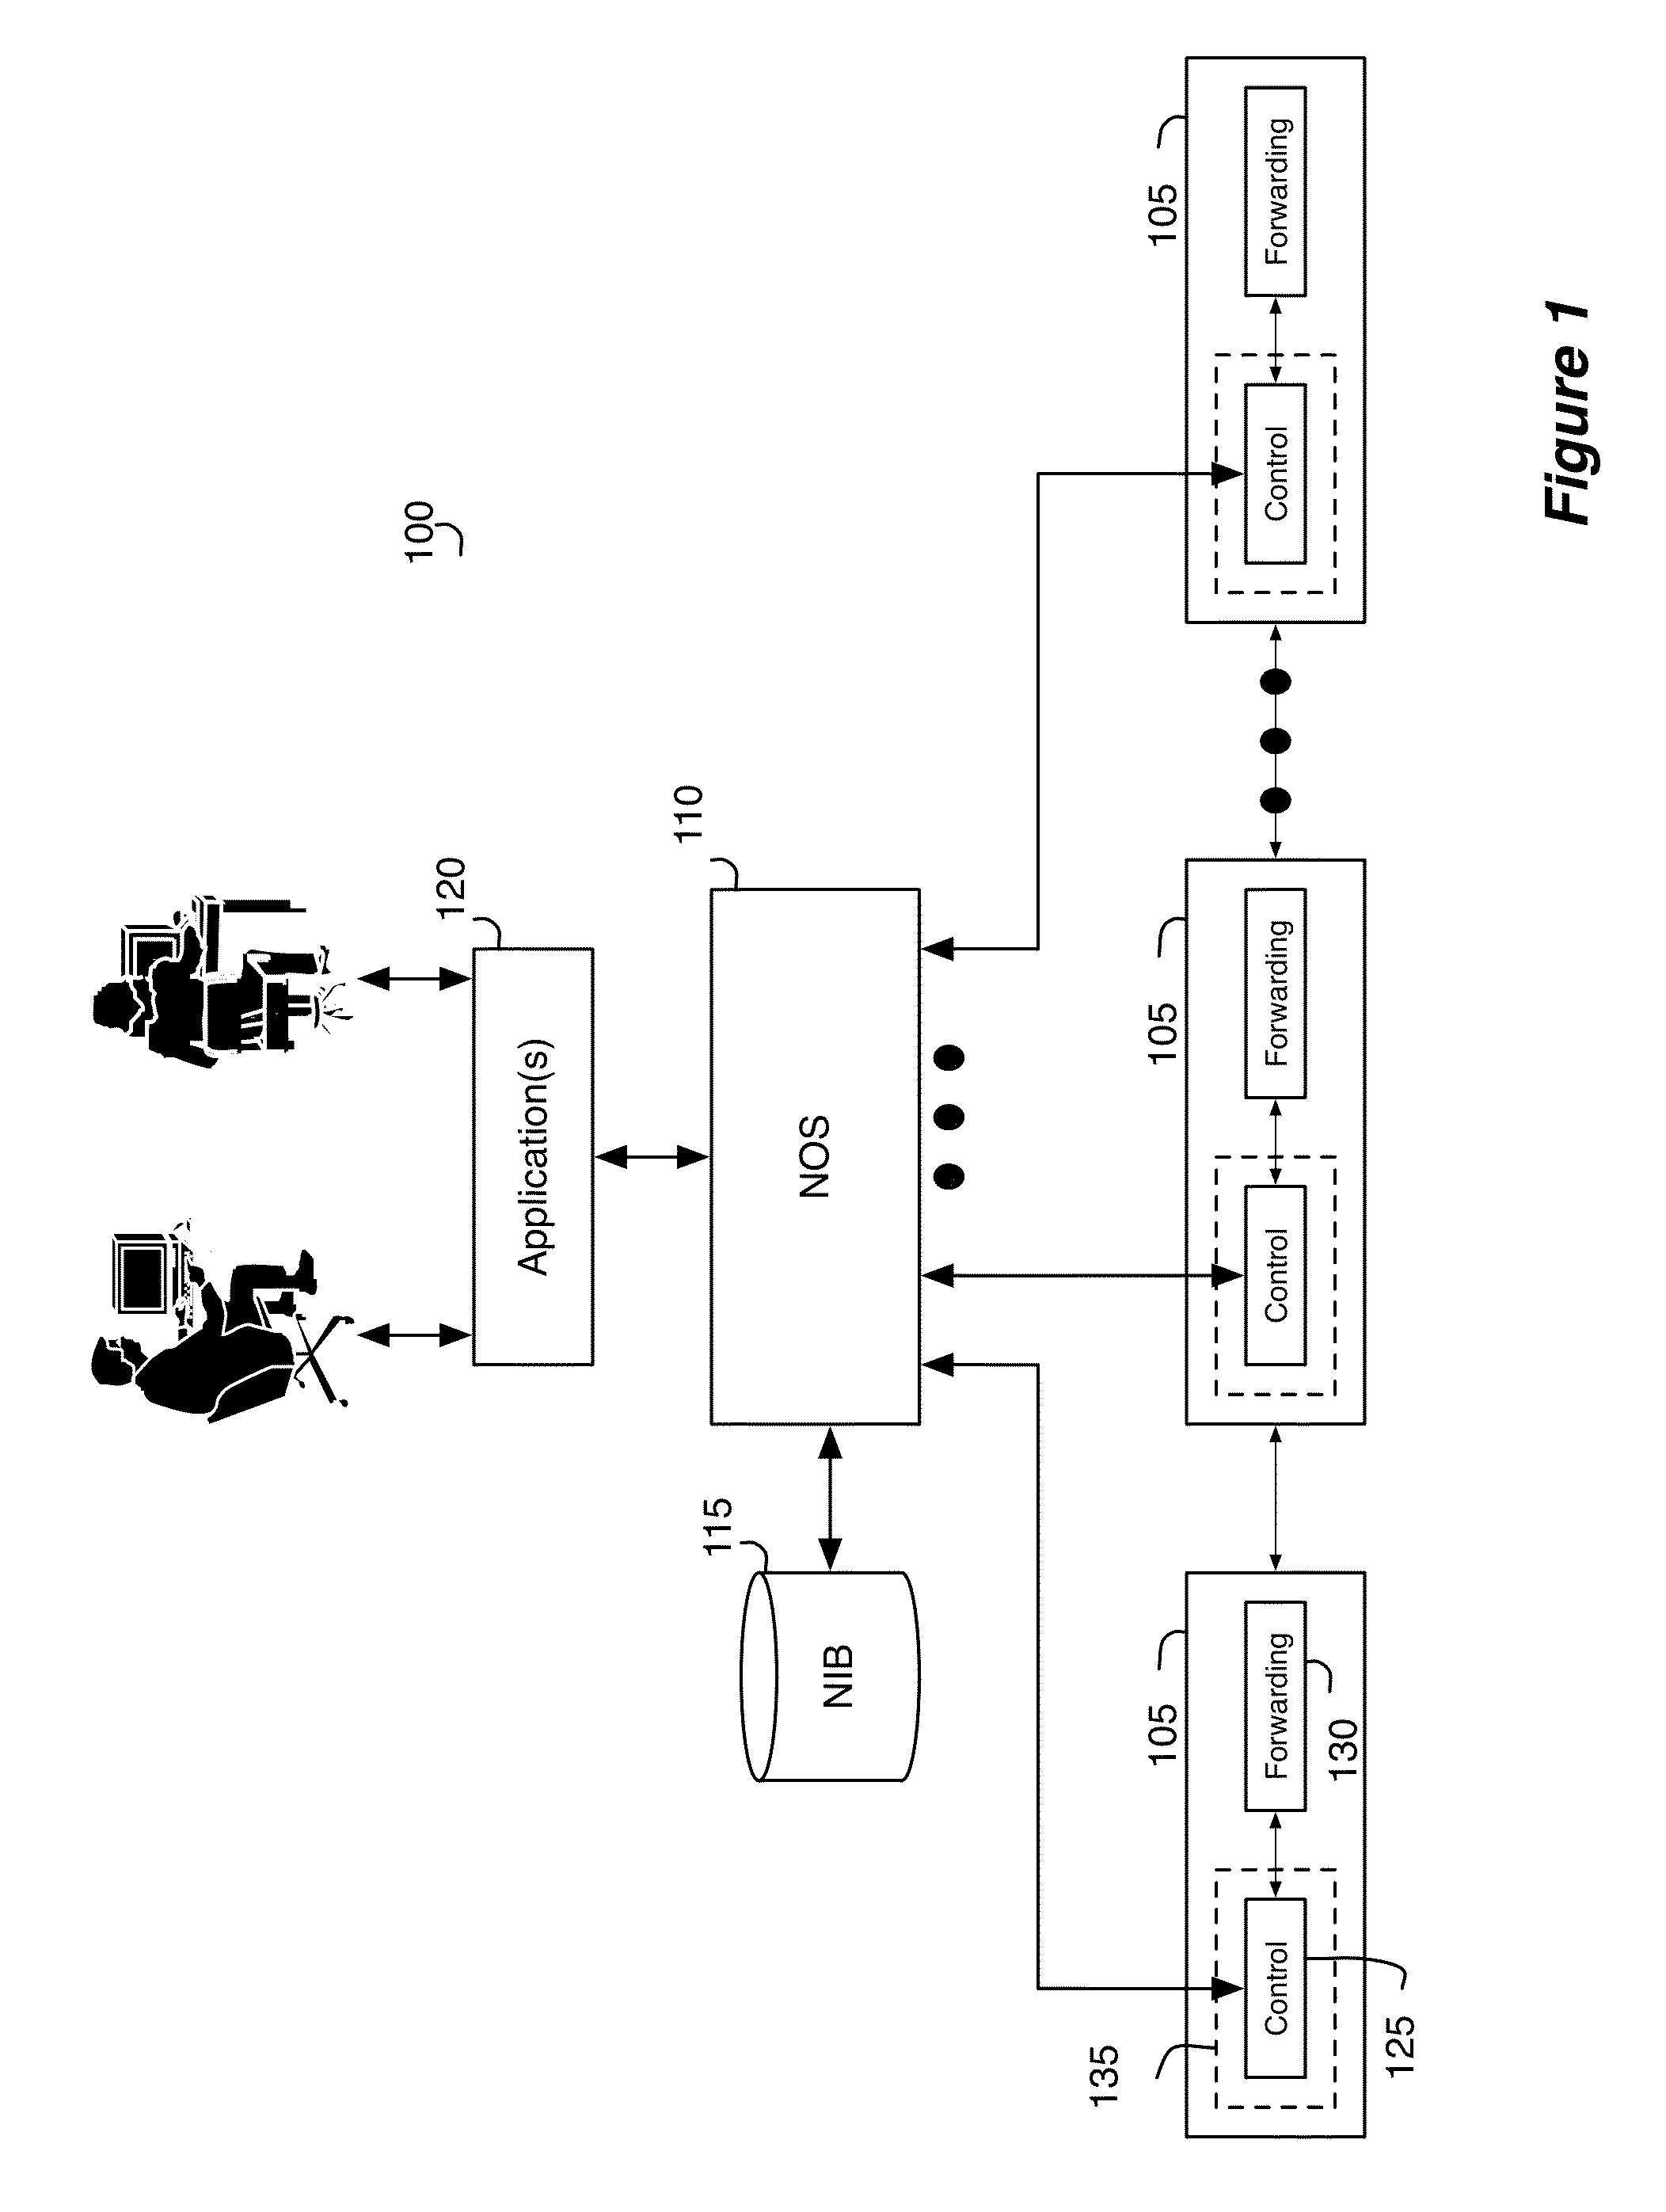 Network virtualization apparatus and method with scheduling capabilities